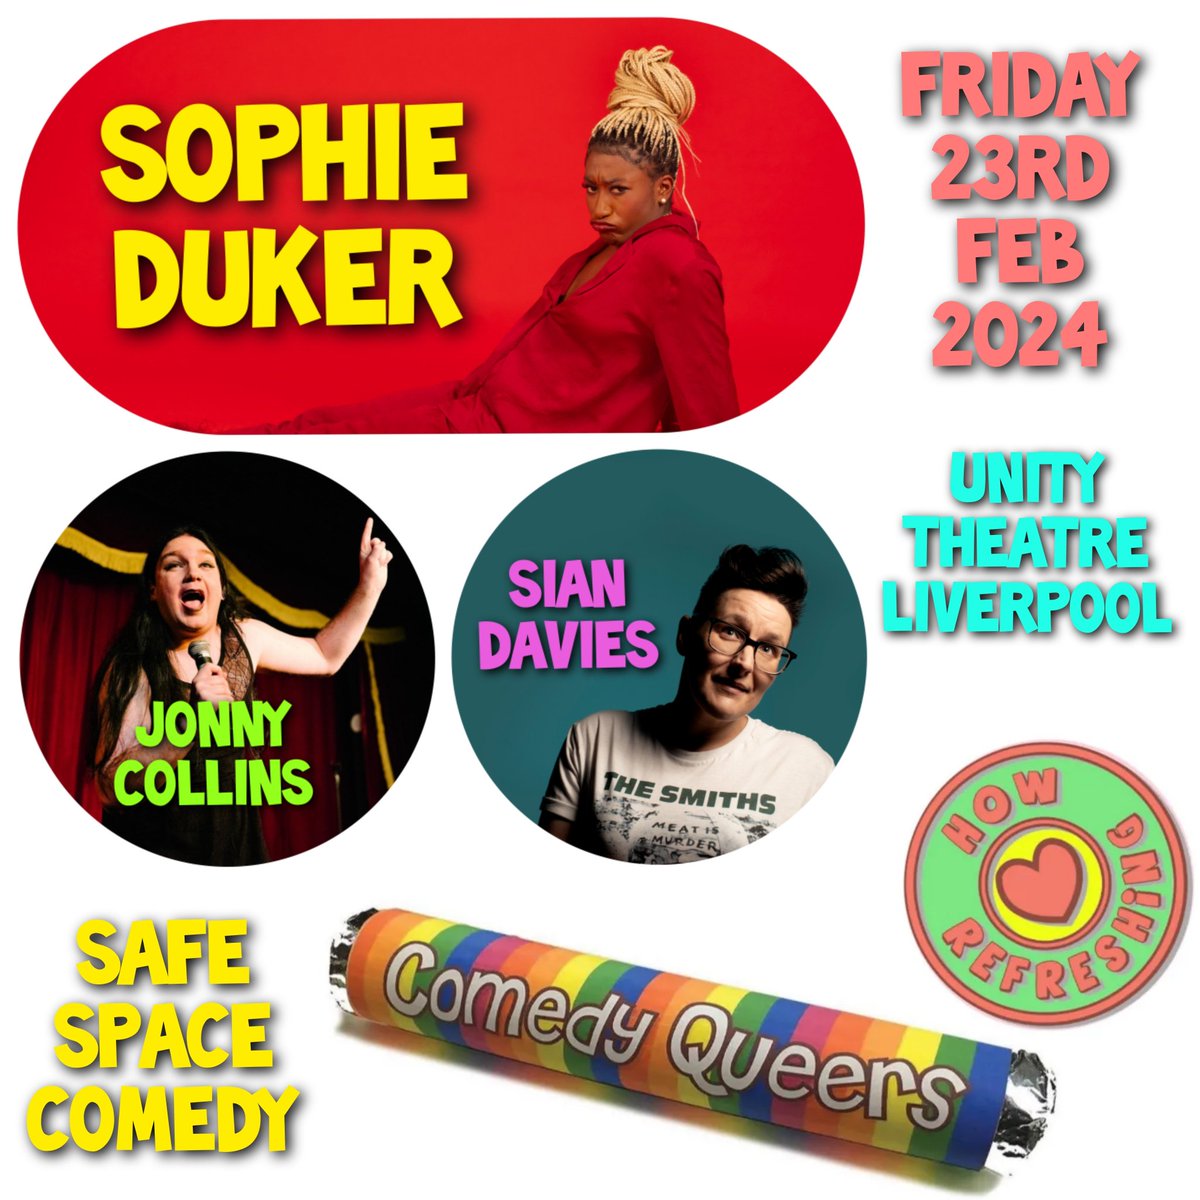 Pppssstttt.... Liverpool, Want to see #taskmaster legend and queer goddess @sophiedukebox next month? Join me and the equally goddess-like @EnbyAndroJonny at @unitytheatre 23rd Feb for #ComedyQueers 🎟️ From £6 🏳️‍⚧️🏳️‍🌈🎉🤖😻🧞💃🍑🍆🎠